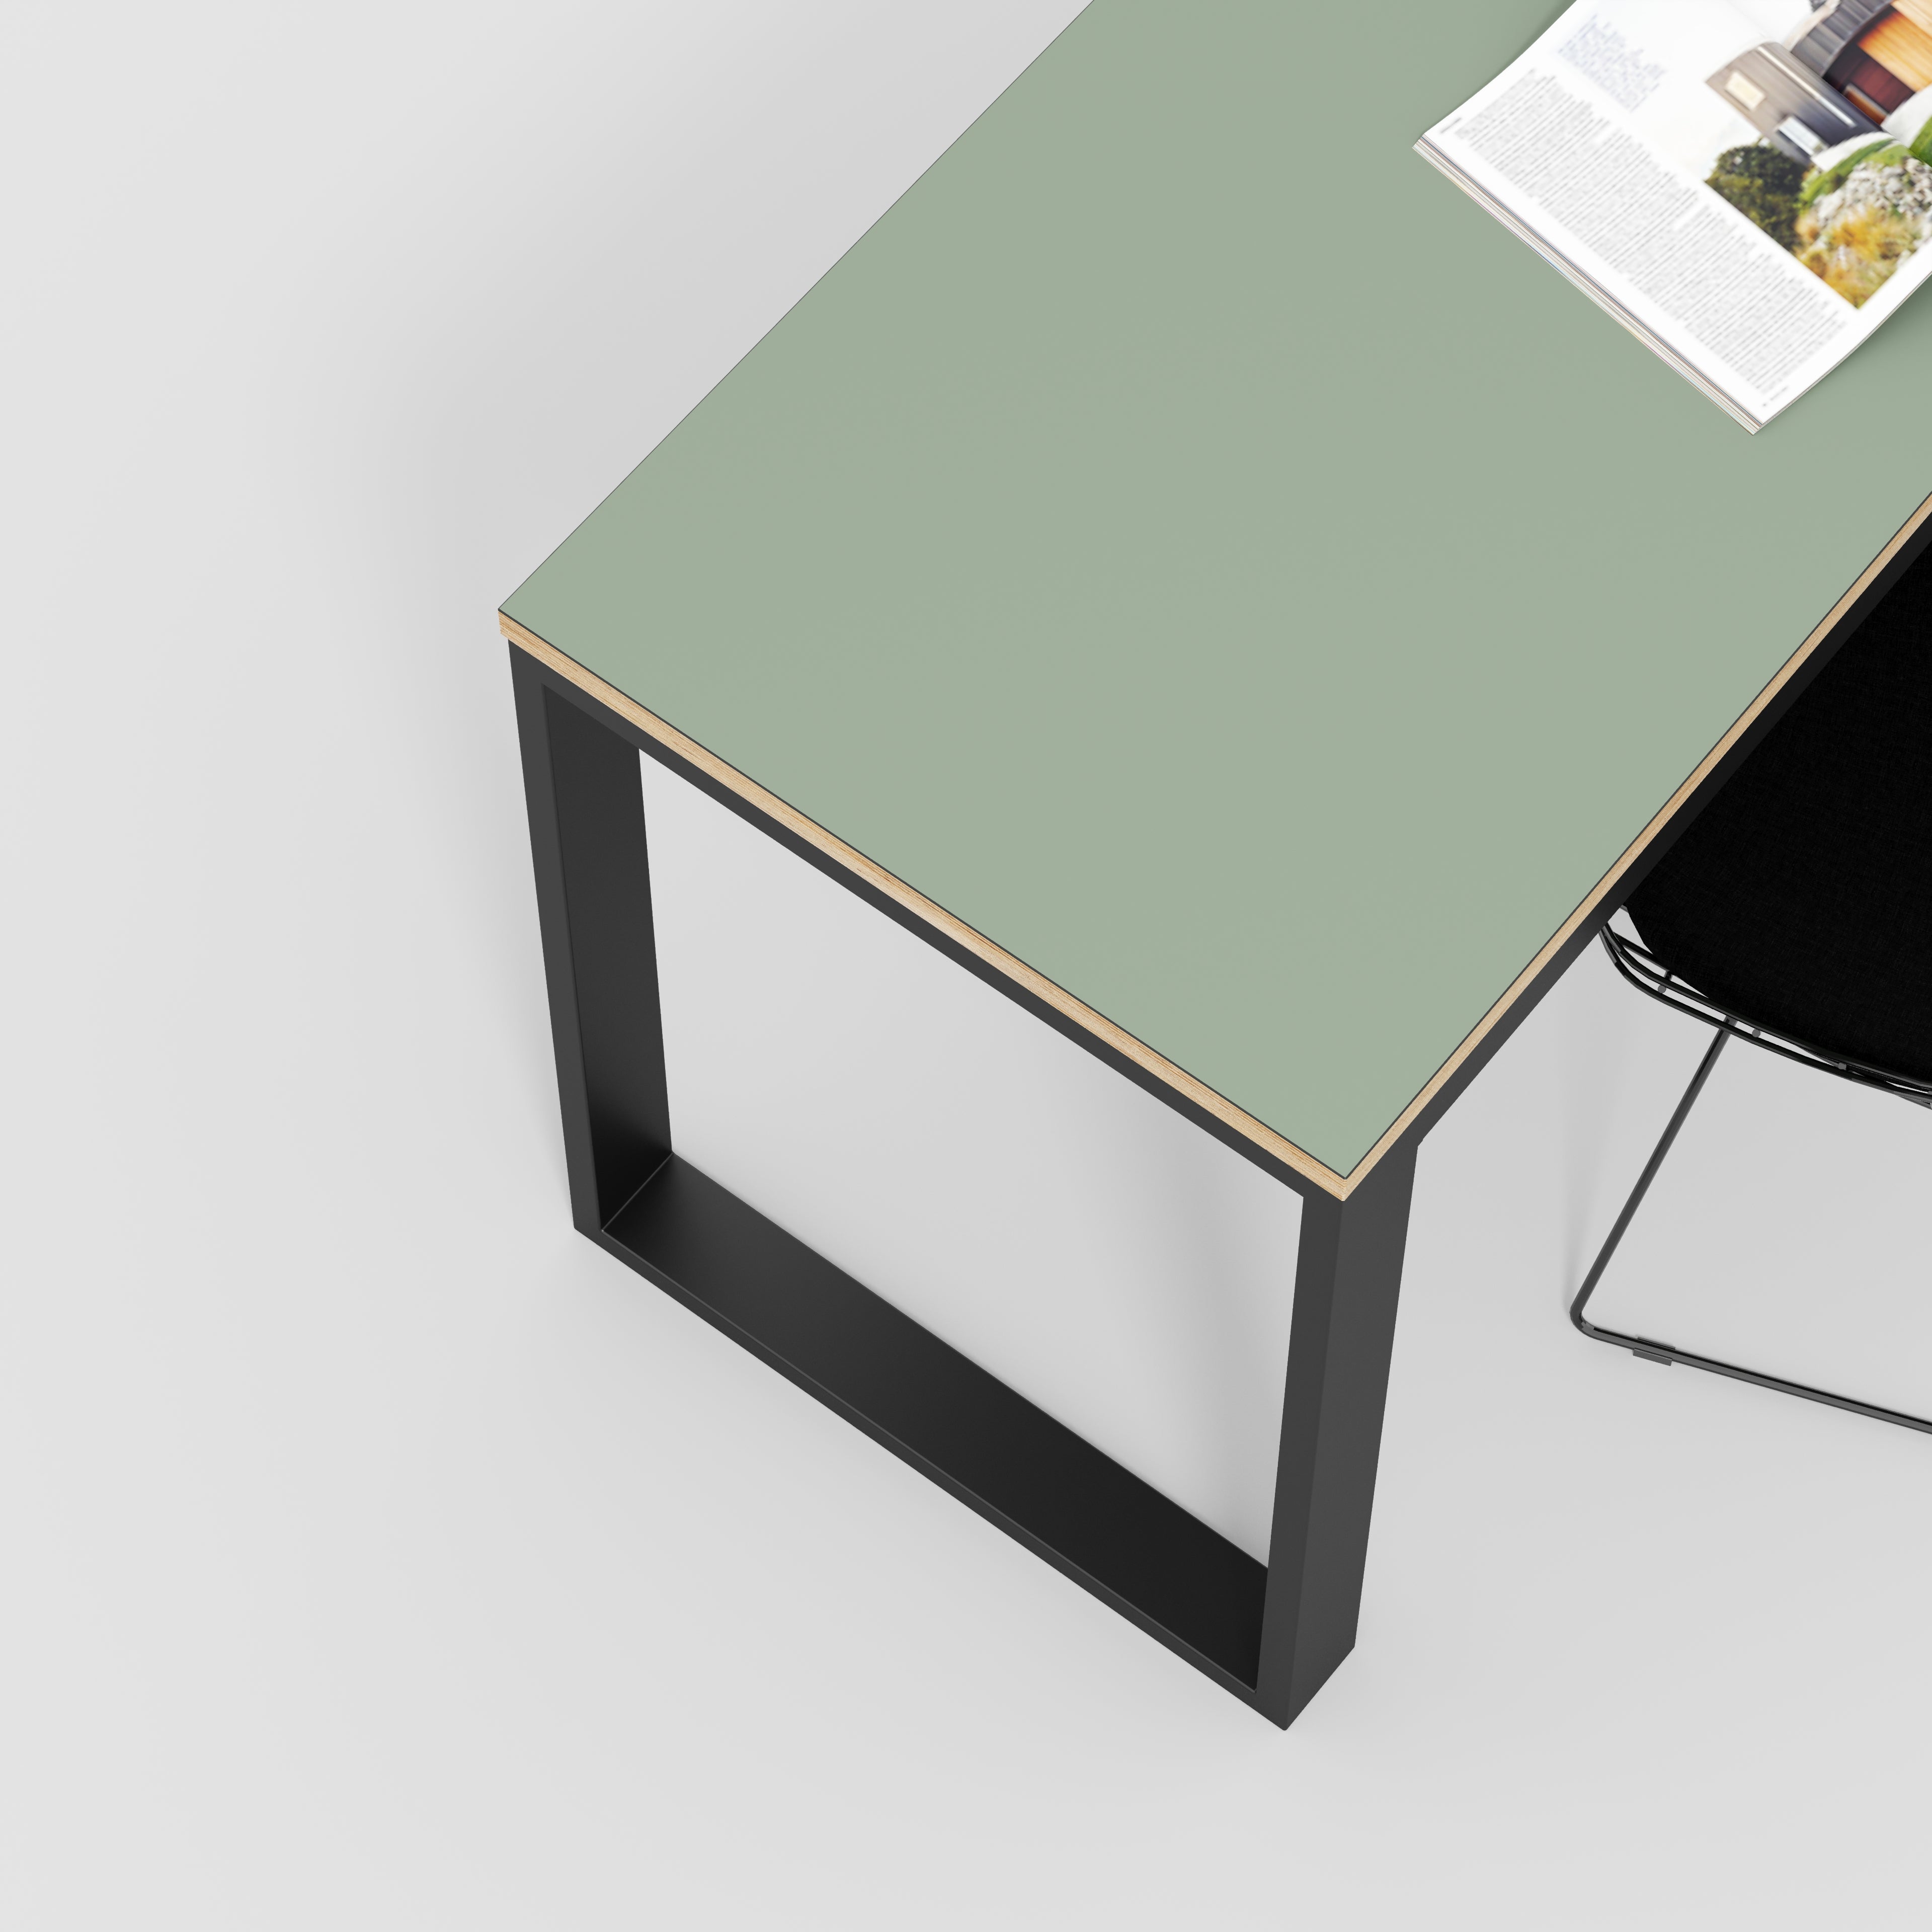 Desk with Black Industrial Frame - Formica Green Slate - 1200(w) x 585(d) x 735(h)